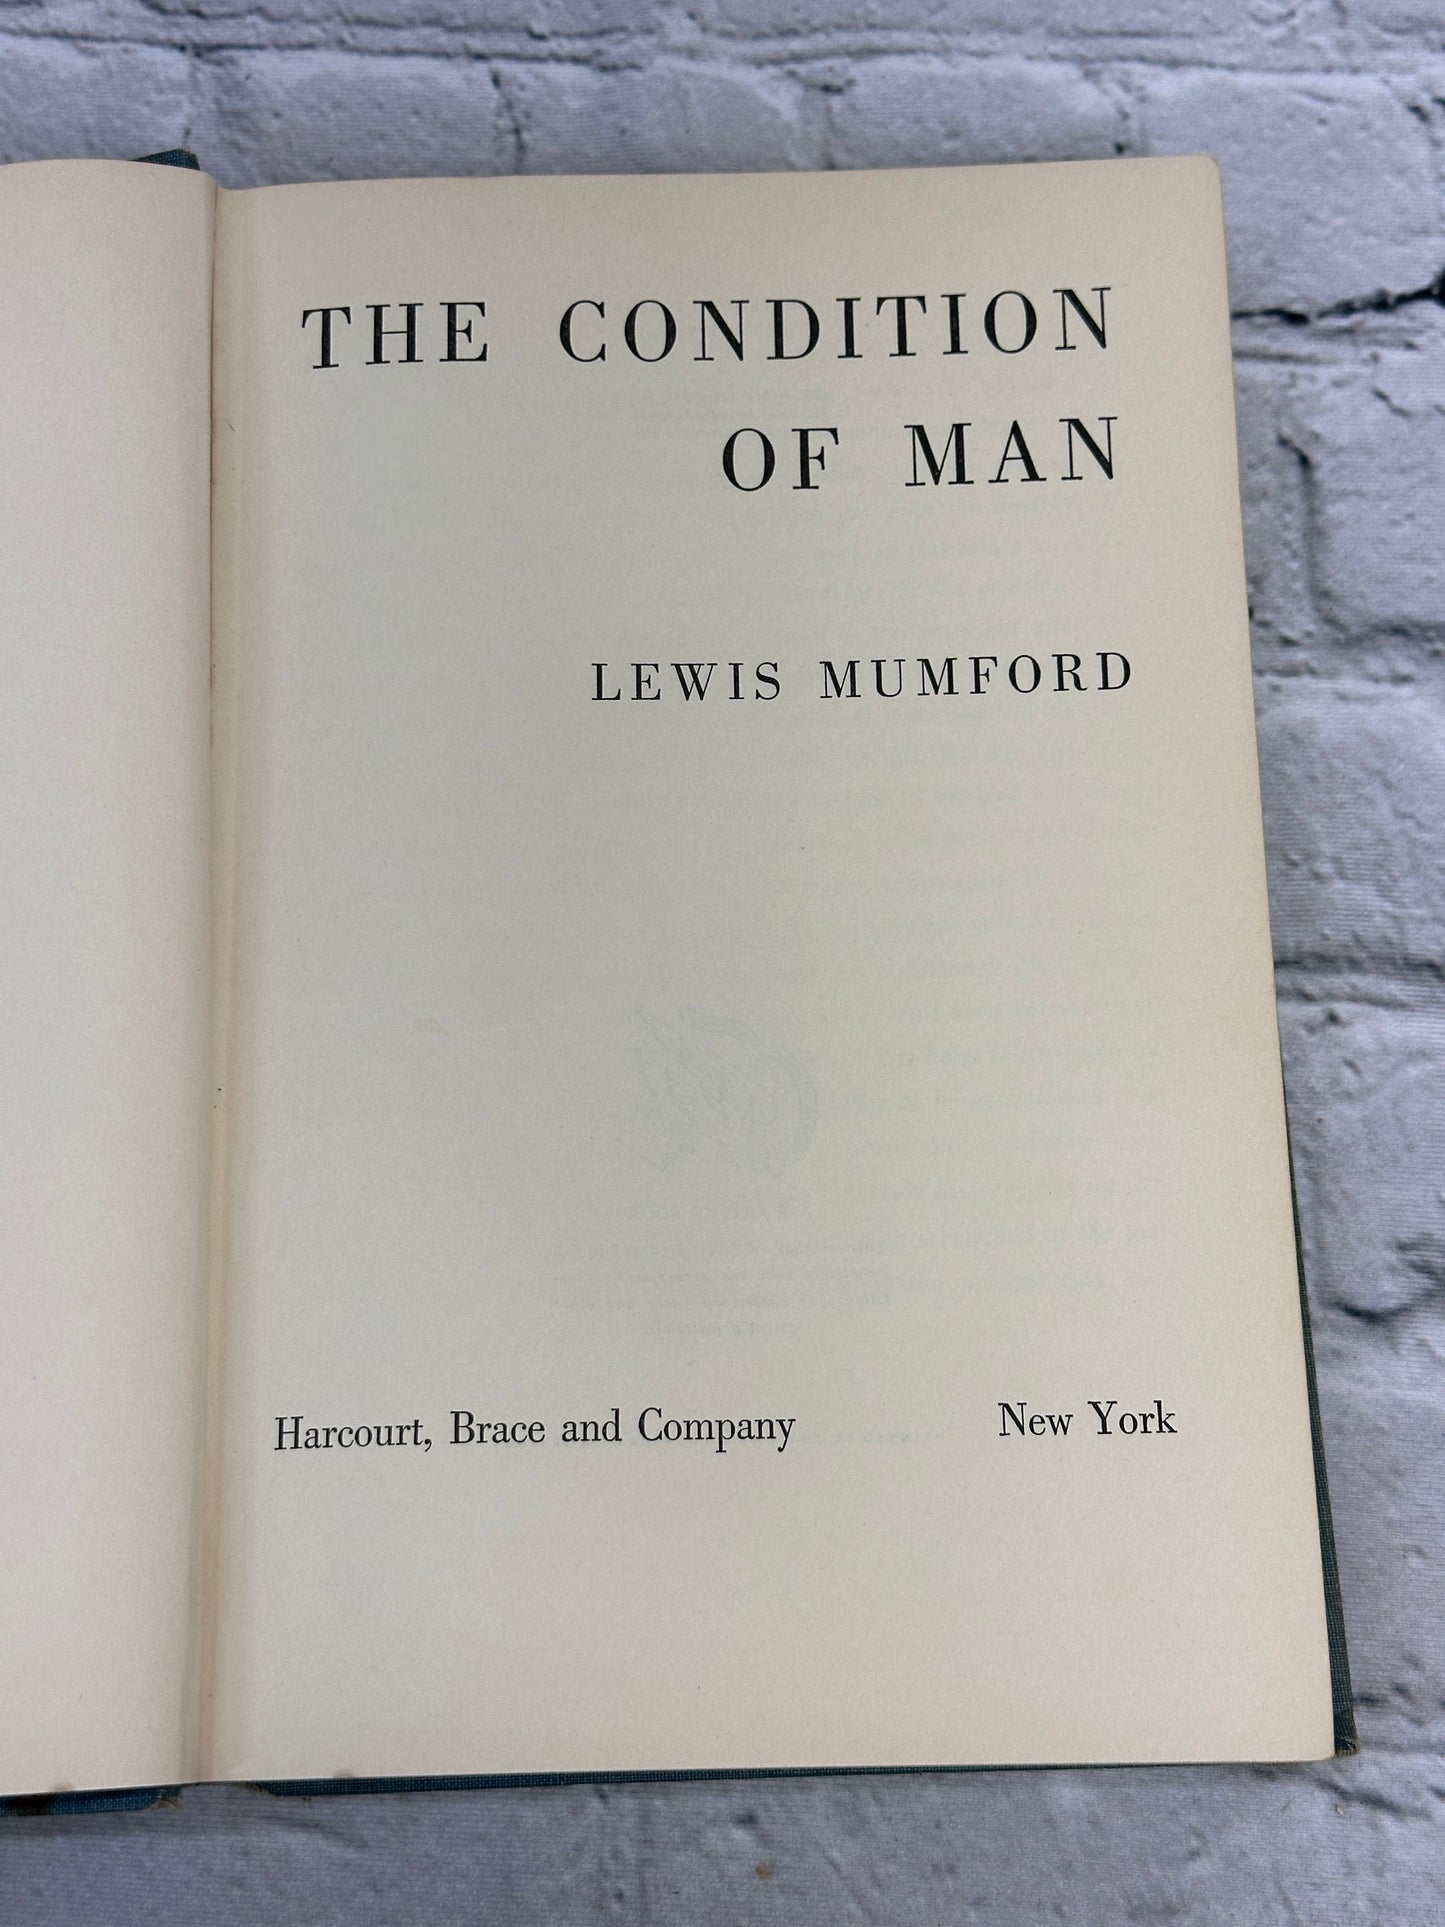 The Condition of Man by Lewis Mumford [1944]